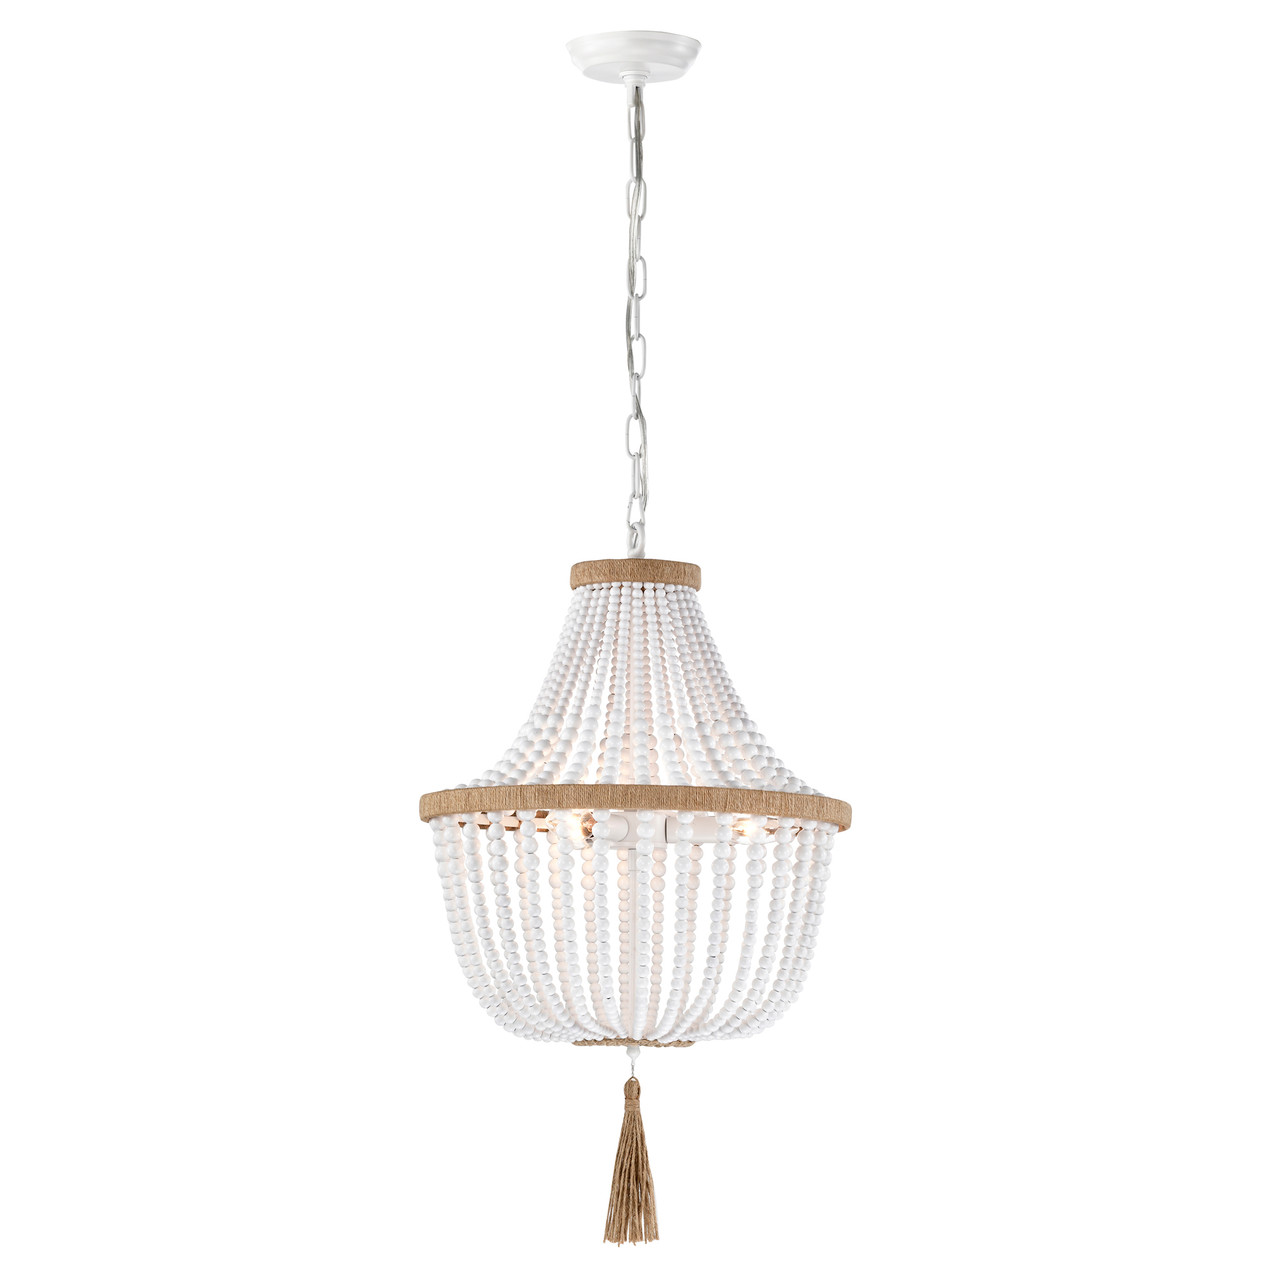 WAREHOUSE OF TIFFANY IMP841A/3 Sotho 16 in. 3-Light Indoor Gloss White Finish Chandelier with Light Kit